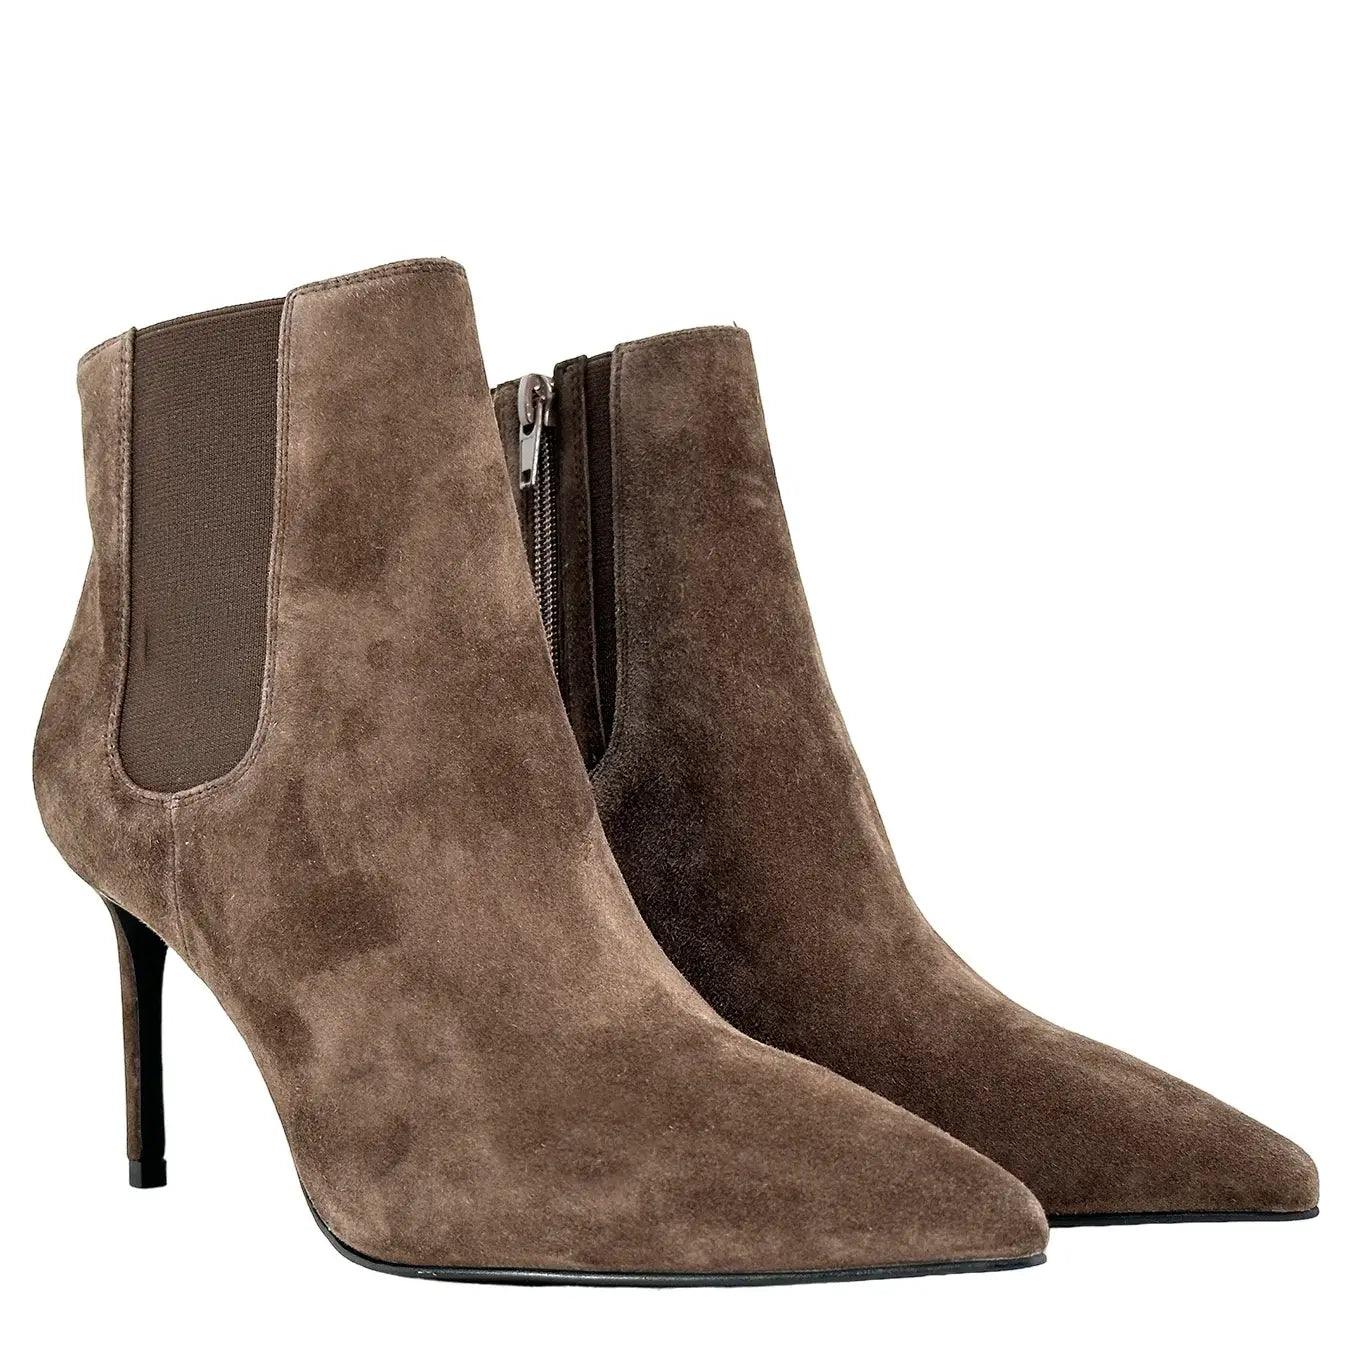 Jeffrey Campbell Stivaletto, Nixie.g, Basso Tacco Alto, Brown Suede, Bassiniboutique.it, 2023 a/i